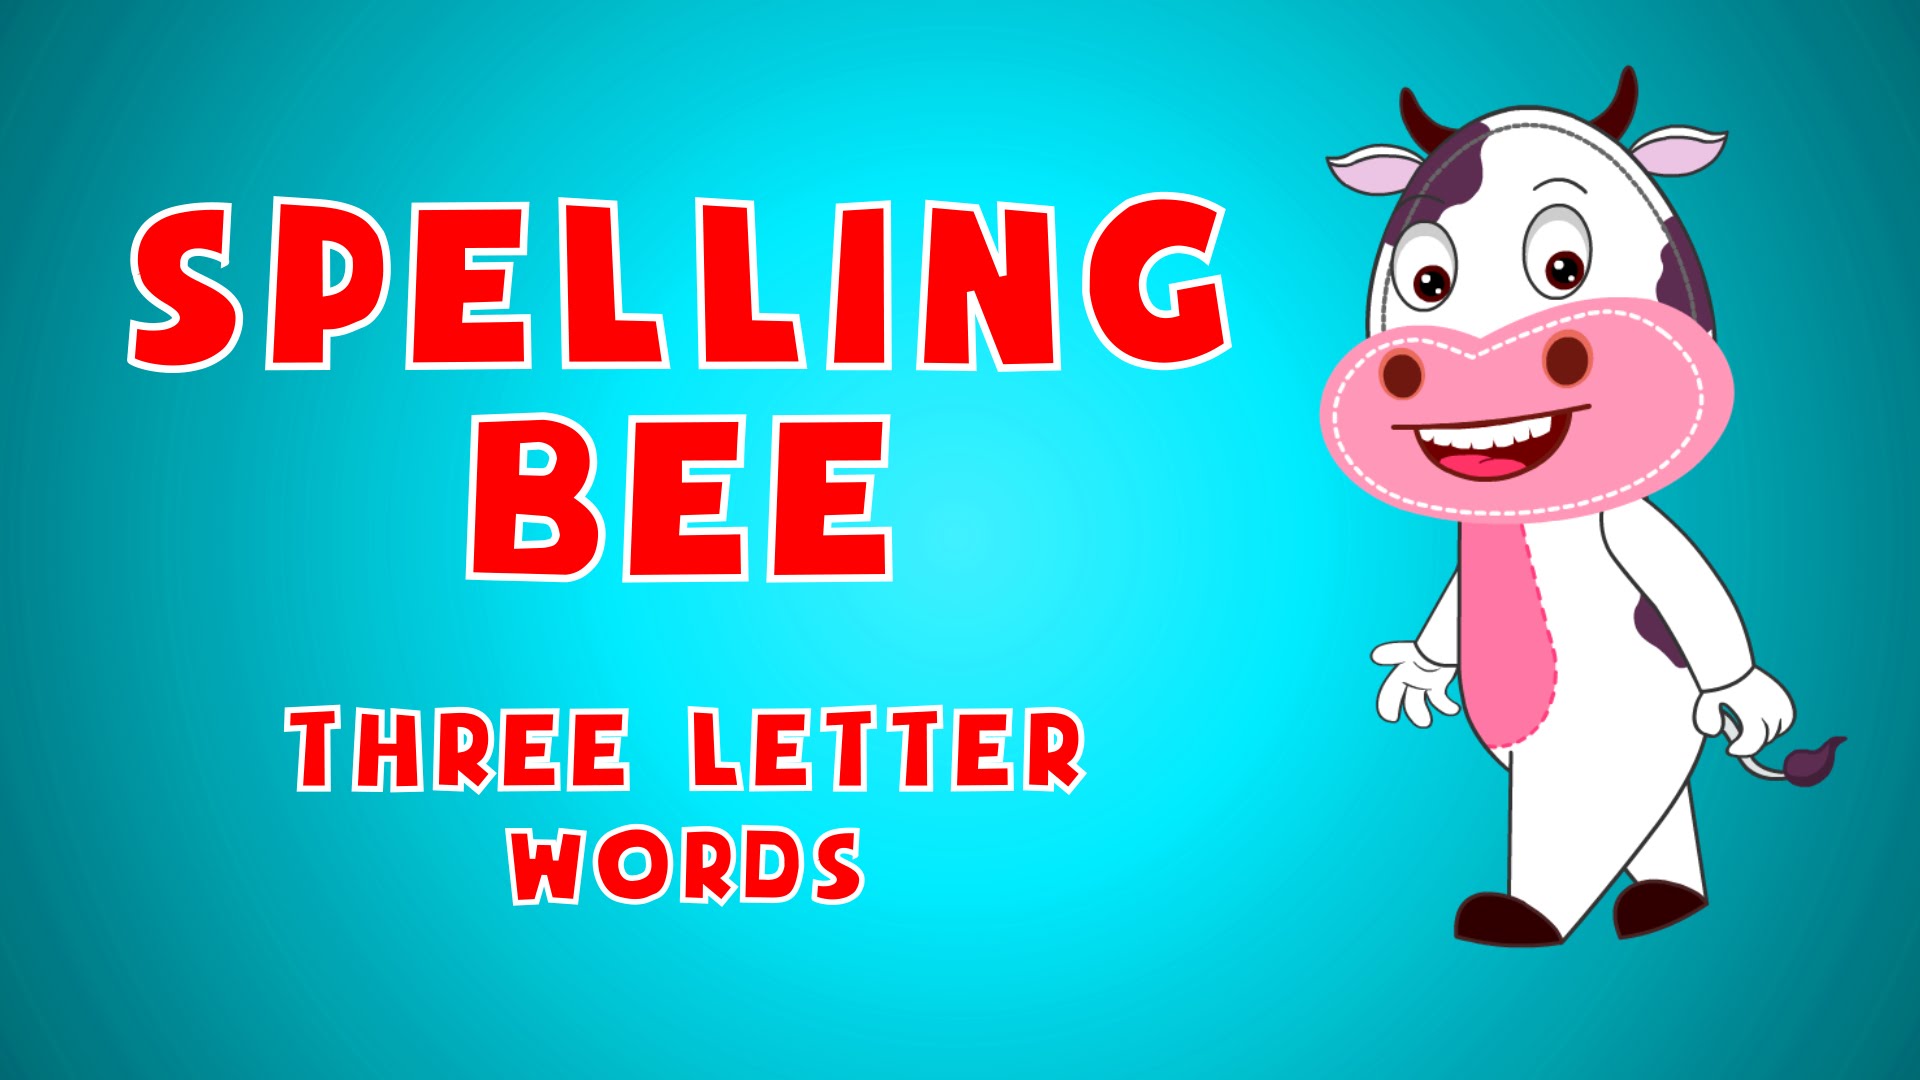 Spelling Bee | Sight Words for Kids | 3 Letter Words | Learn English ...